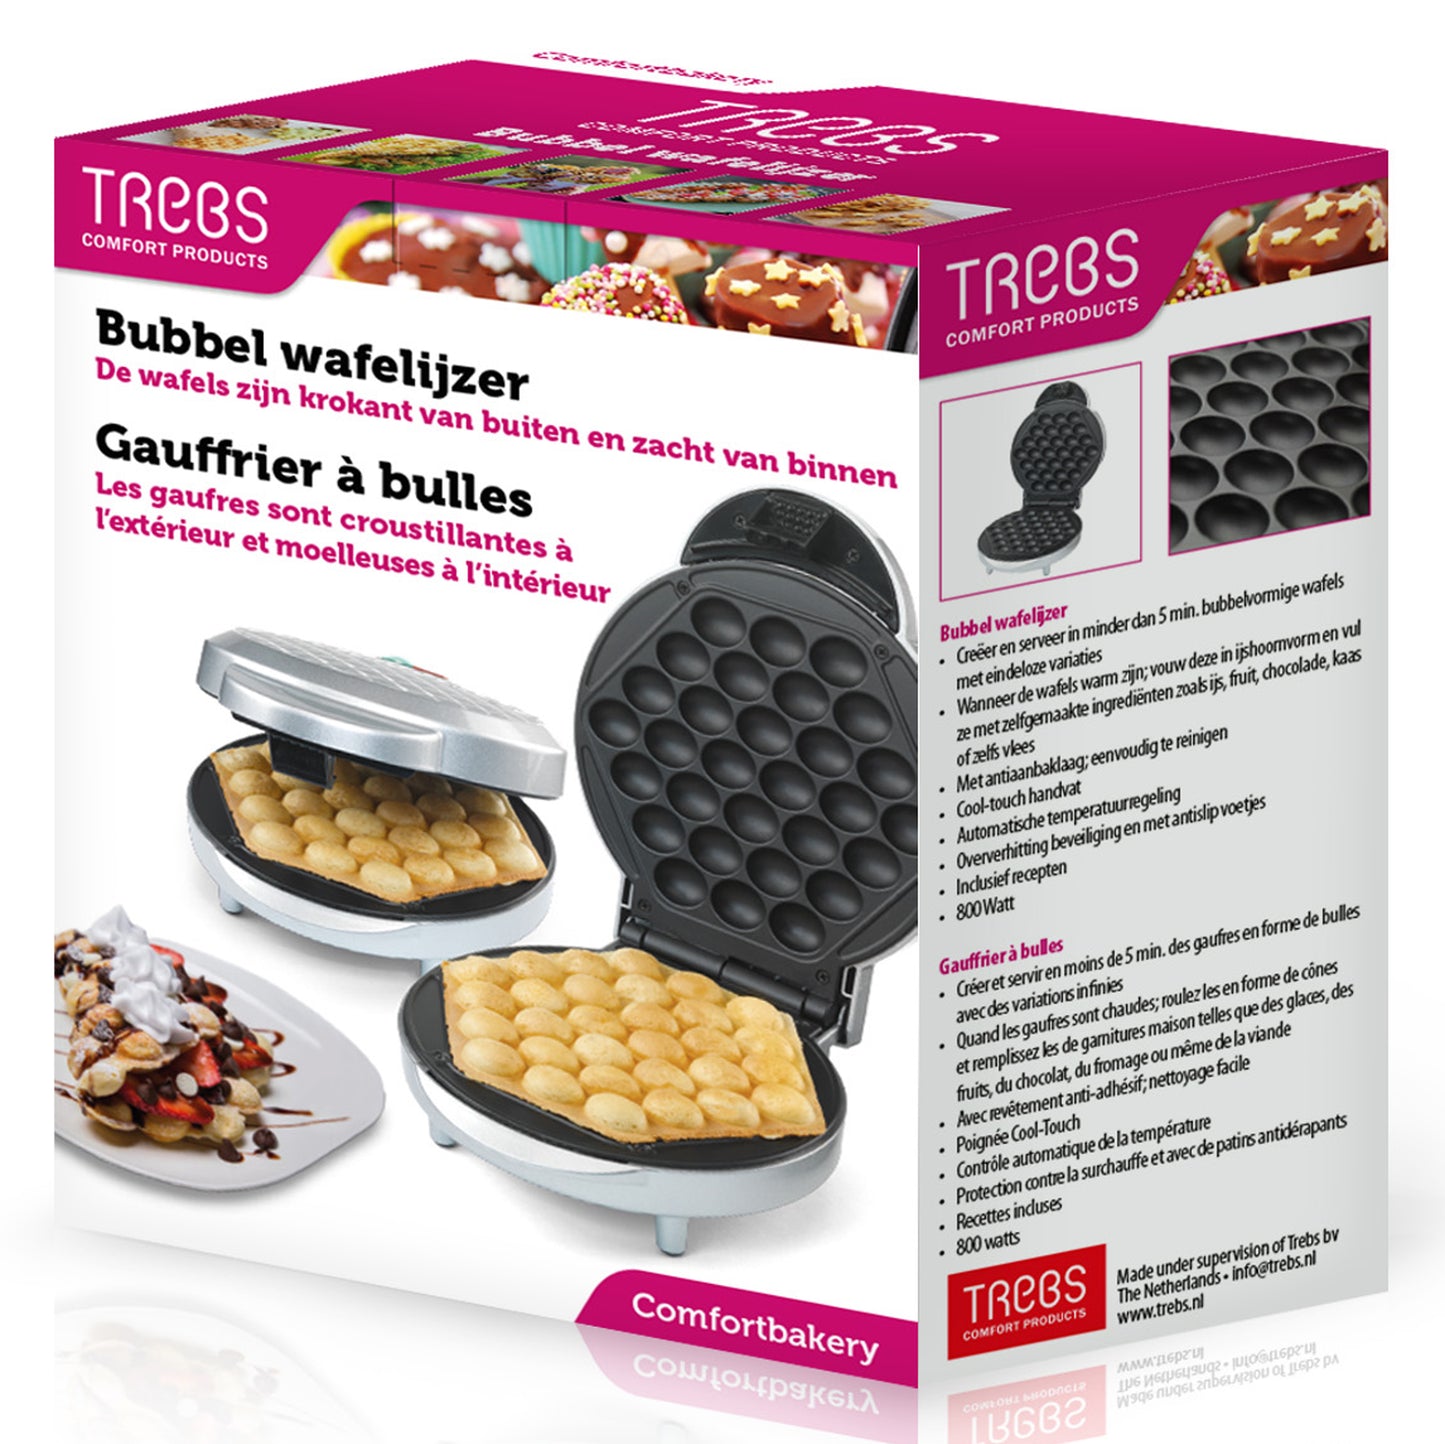 Trebs 99361 - Bubble waffle maker Comfortbakery with indicator light and non-stick coating